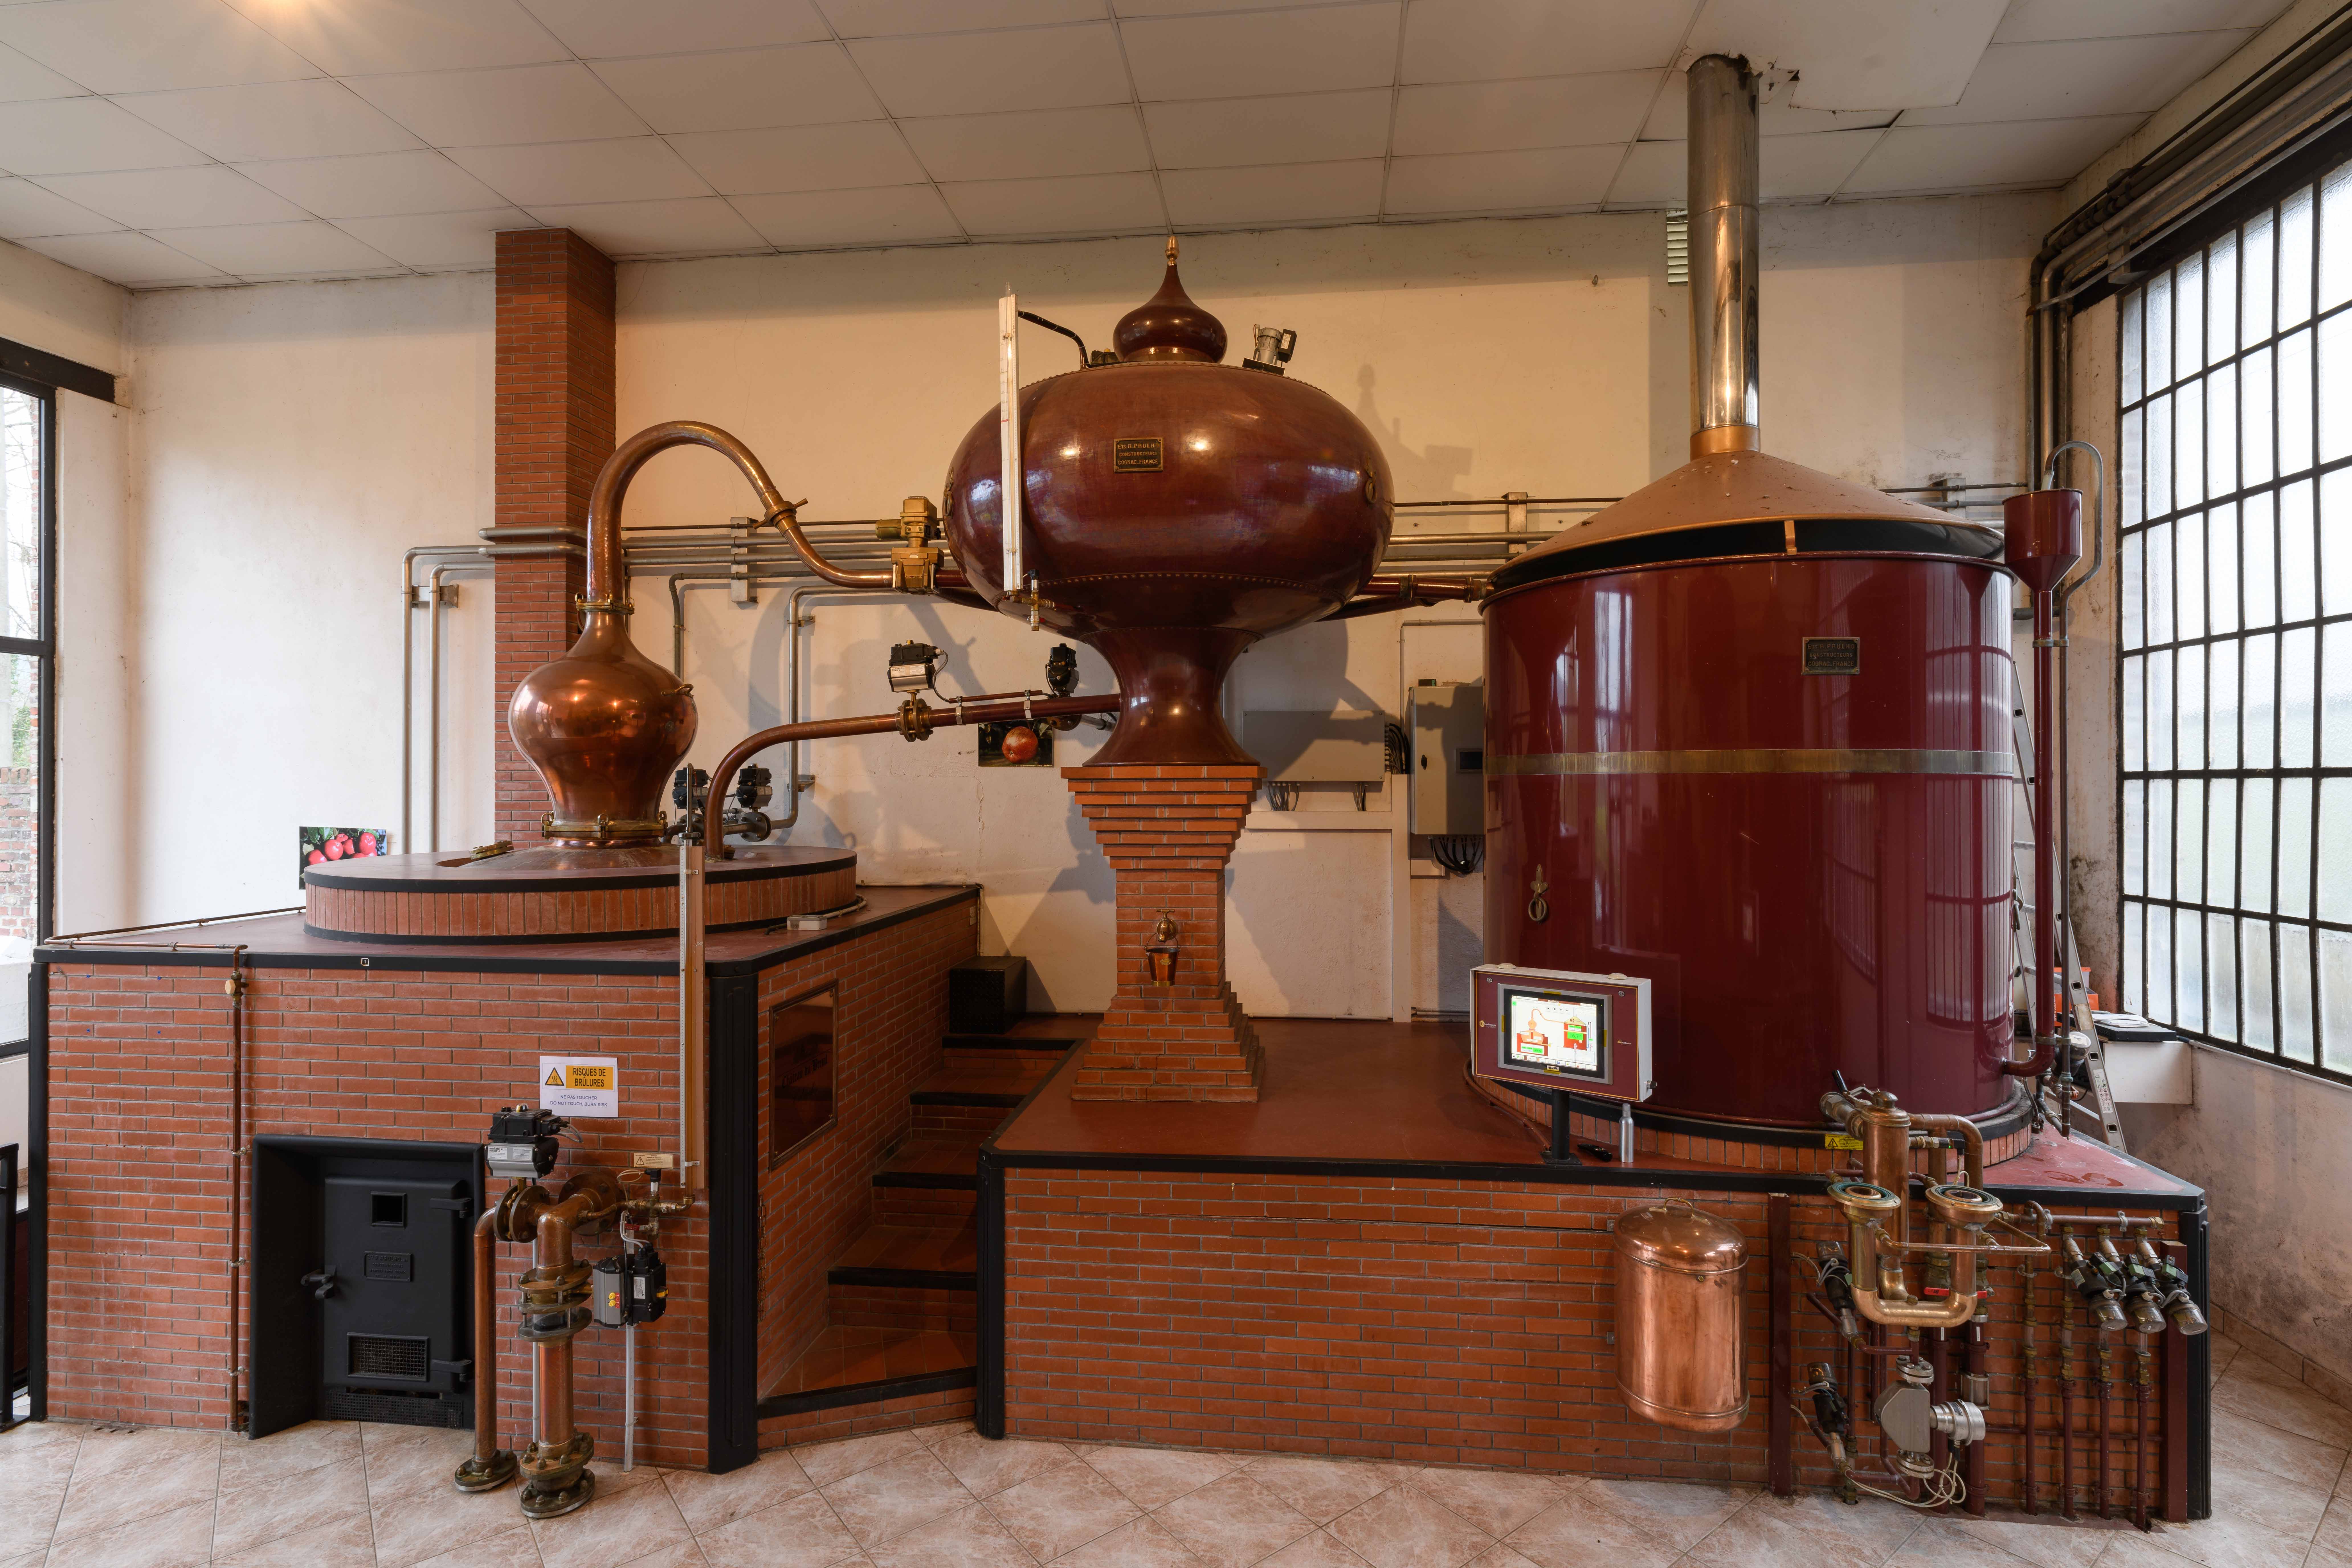 Make your own Calvados at Chateau du Breuil – Normandy Tourism, France